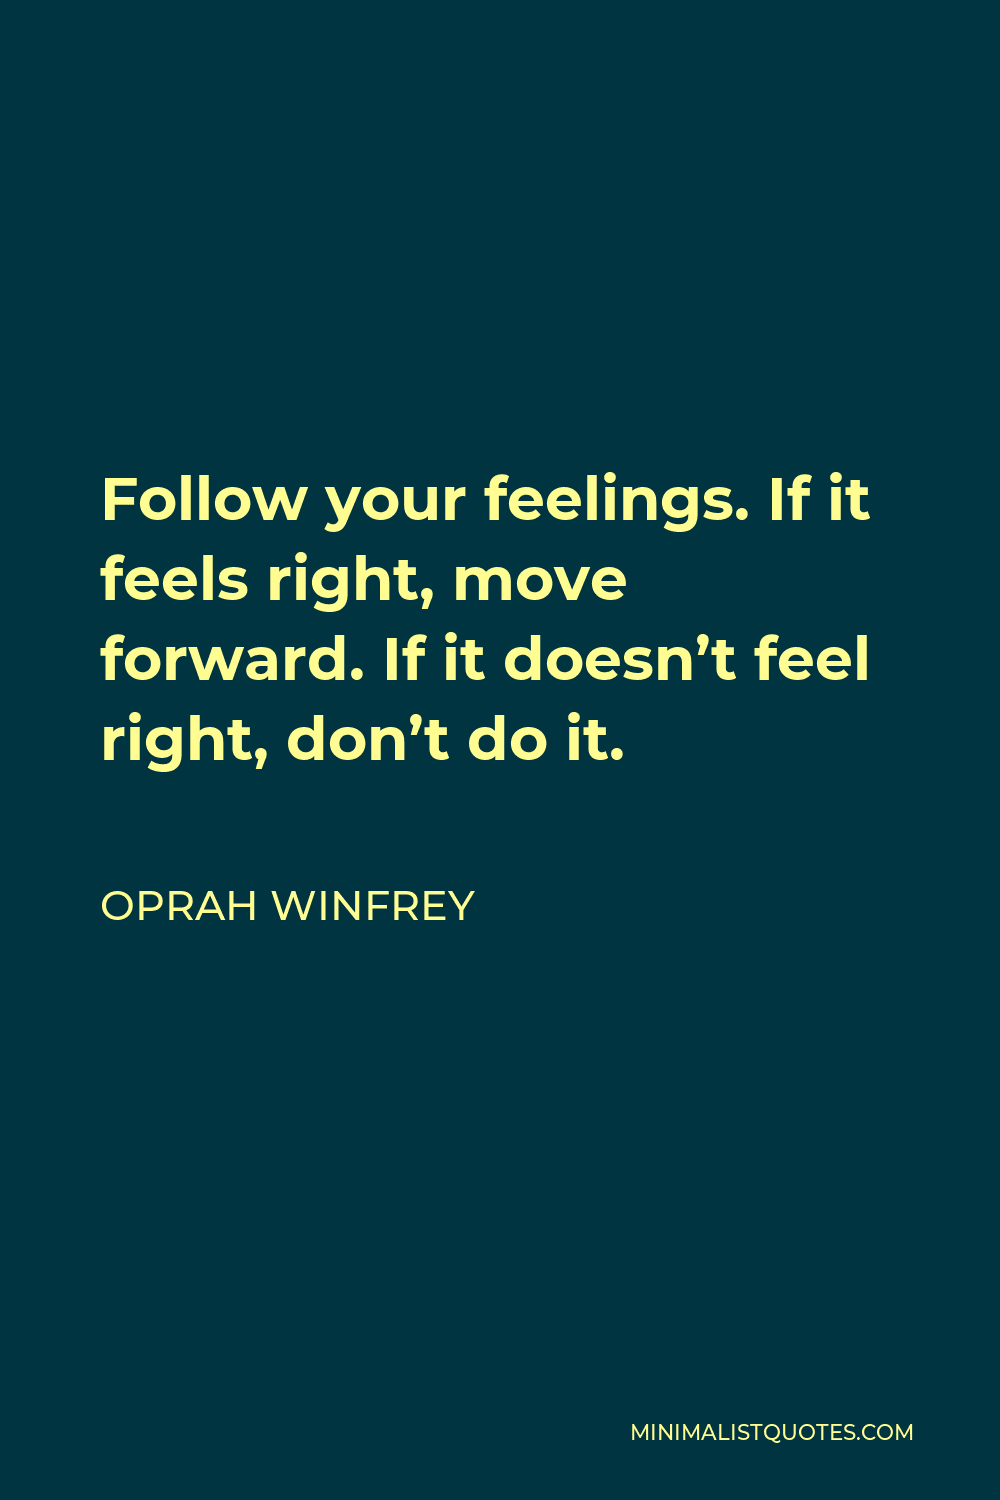 Oprah Winfrey Quote - Follow your feelings. If it feels right, move forward. If it doesn’t feel right, don’t do it.